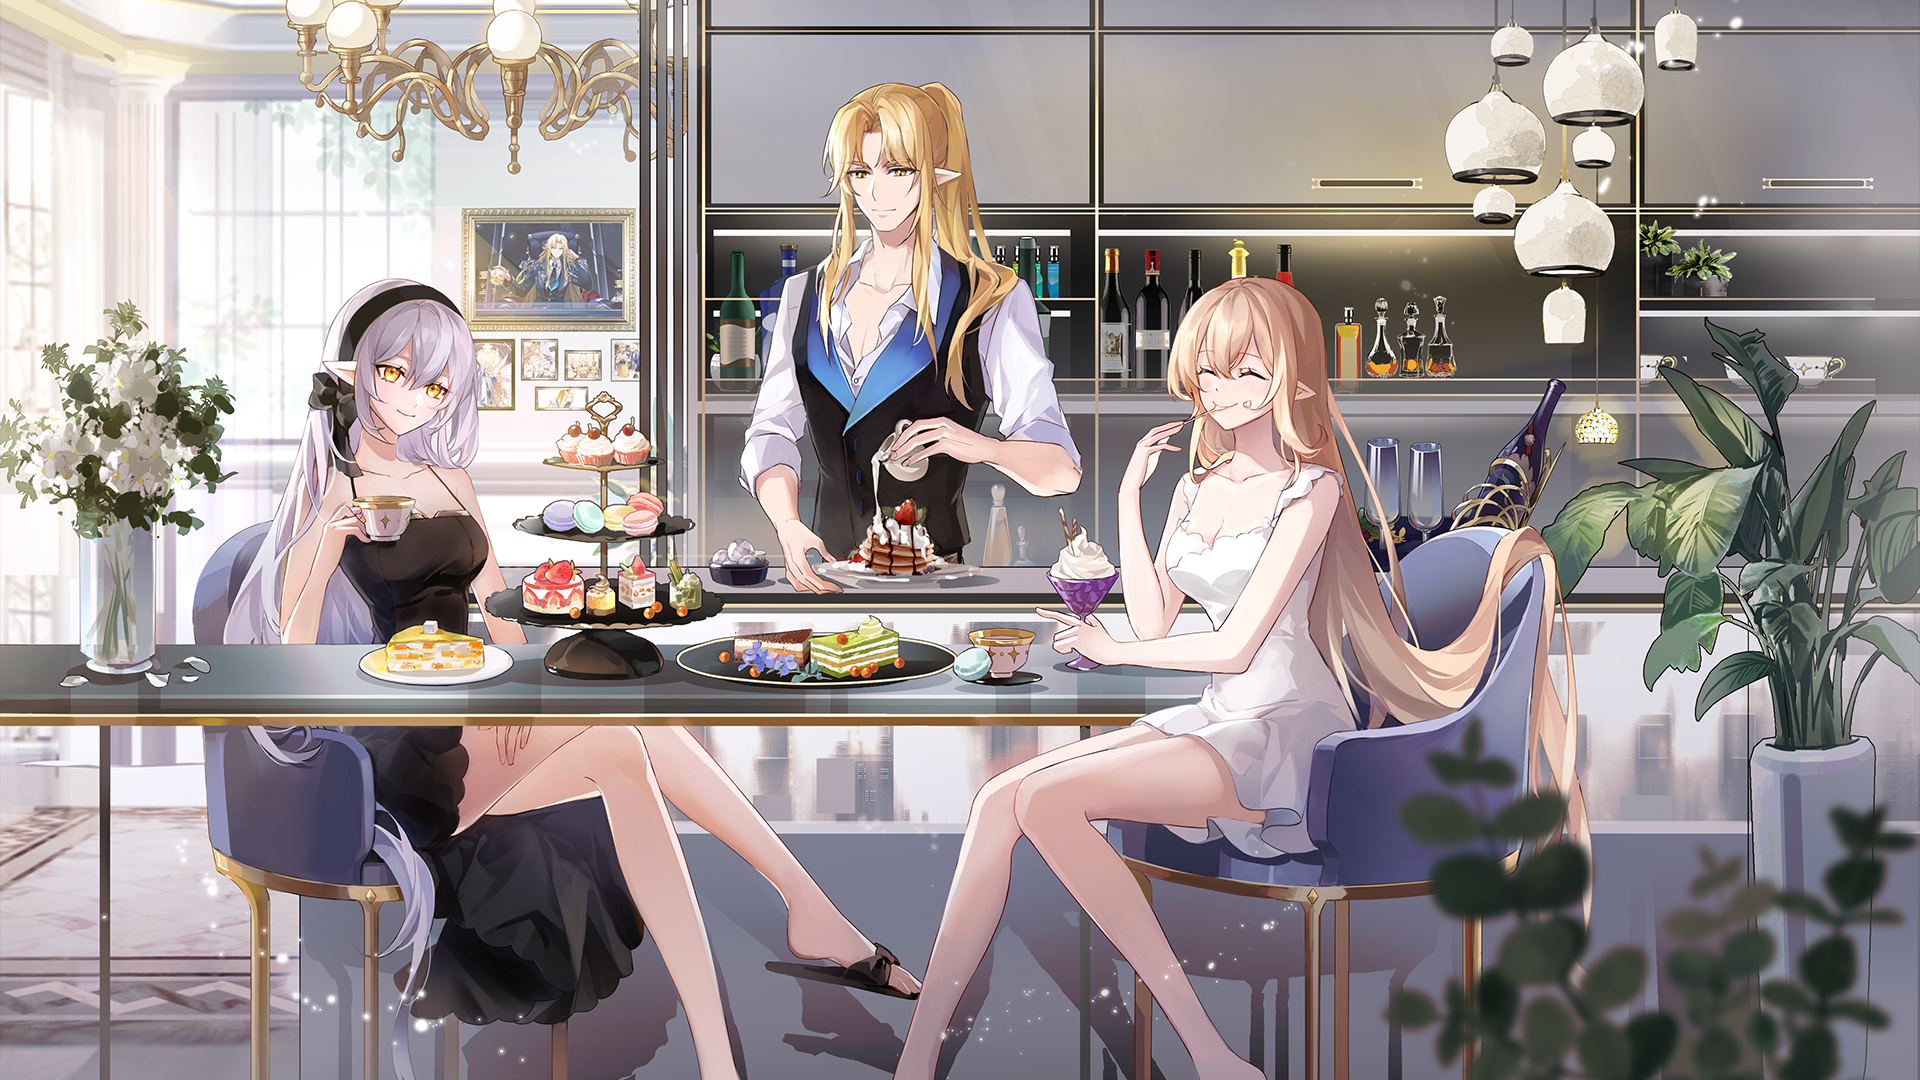 Anime 1920x1080 brothers sisters sweets food blonde closed eyes pointy ears anime girls anime boys Aura star